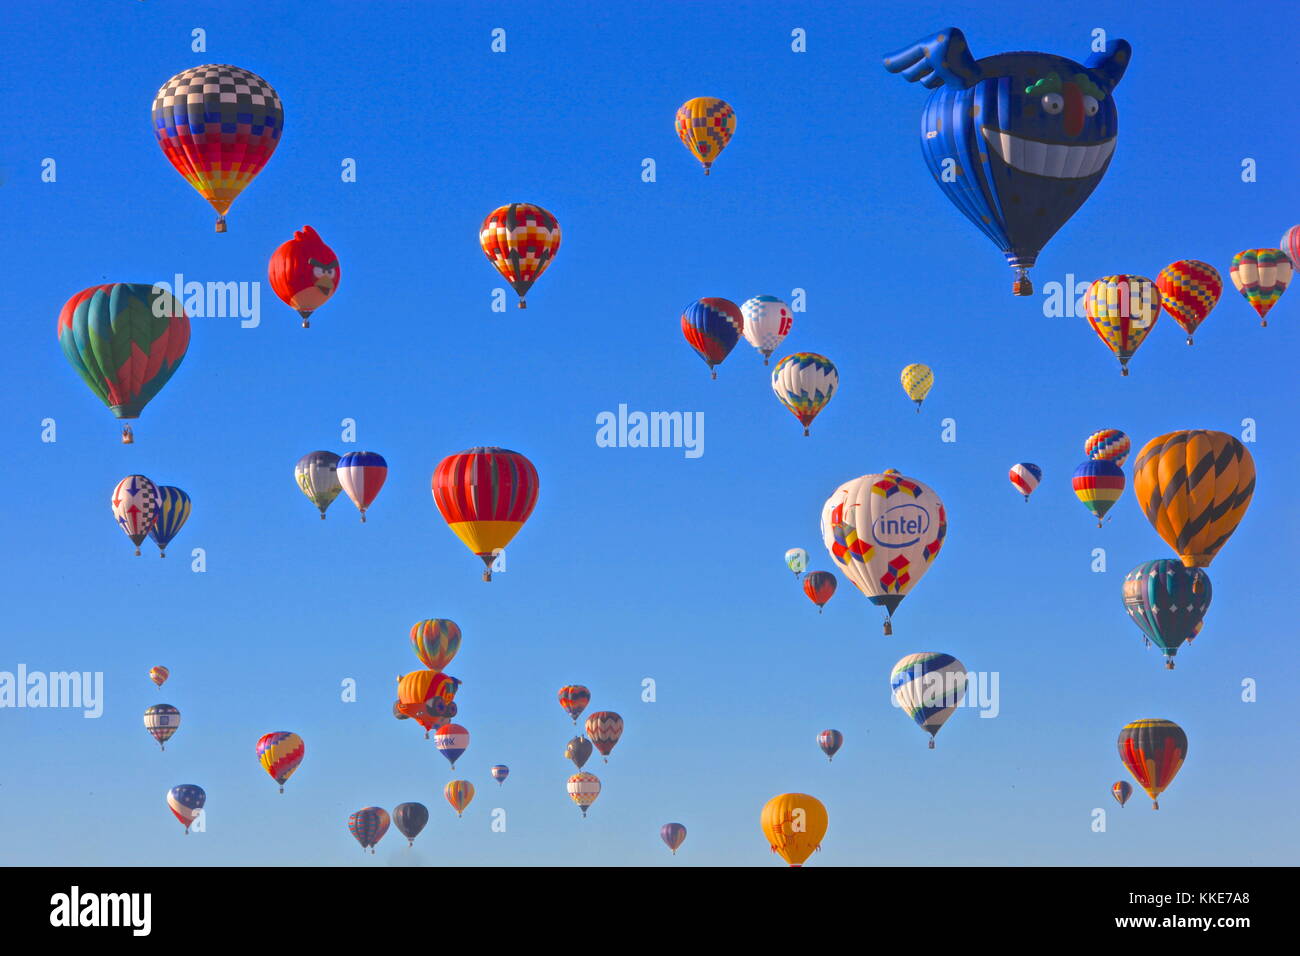 Albuquerque Hot Air Balloon Fiesta photo print fills the New Mexico sky with hundreds of colorful hot air balloons.